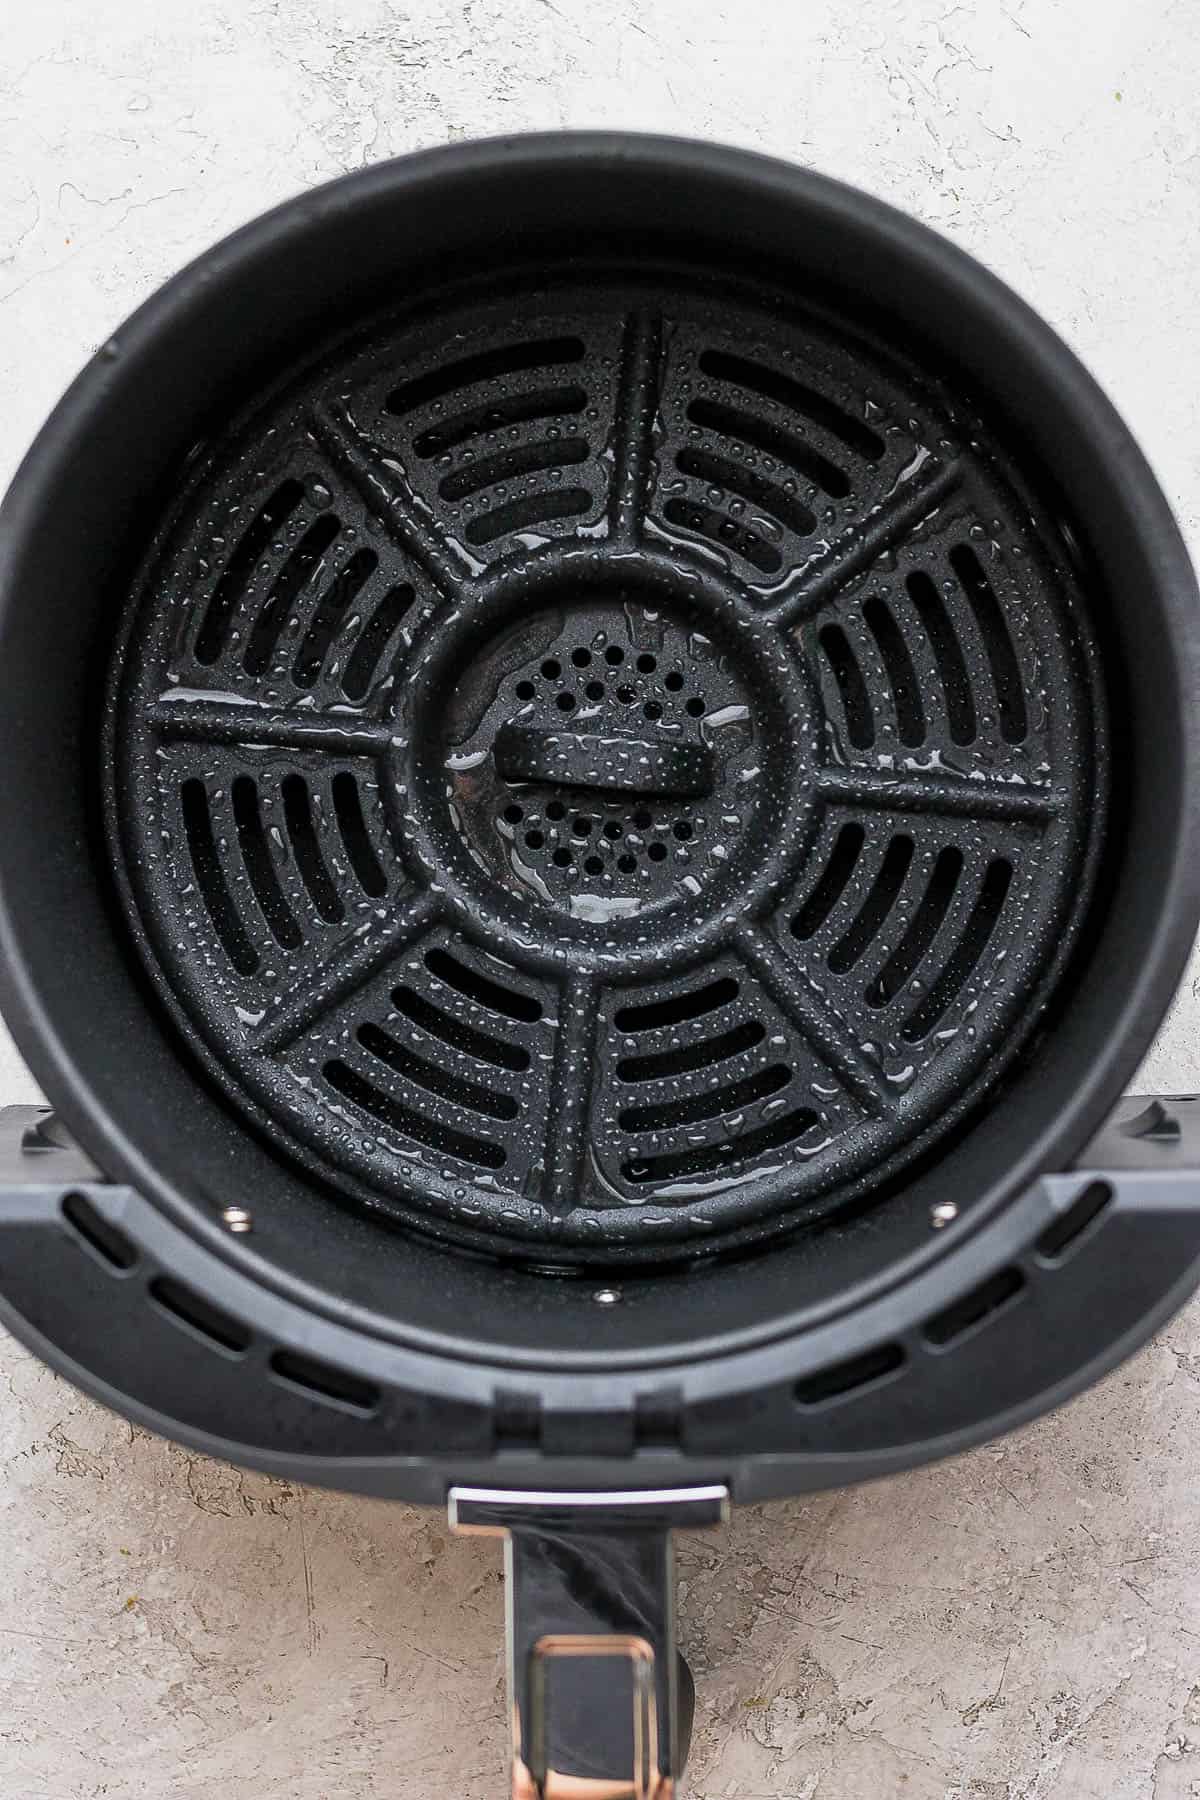 The air fryer basket after it was sprayed with cooking spray.